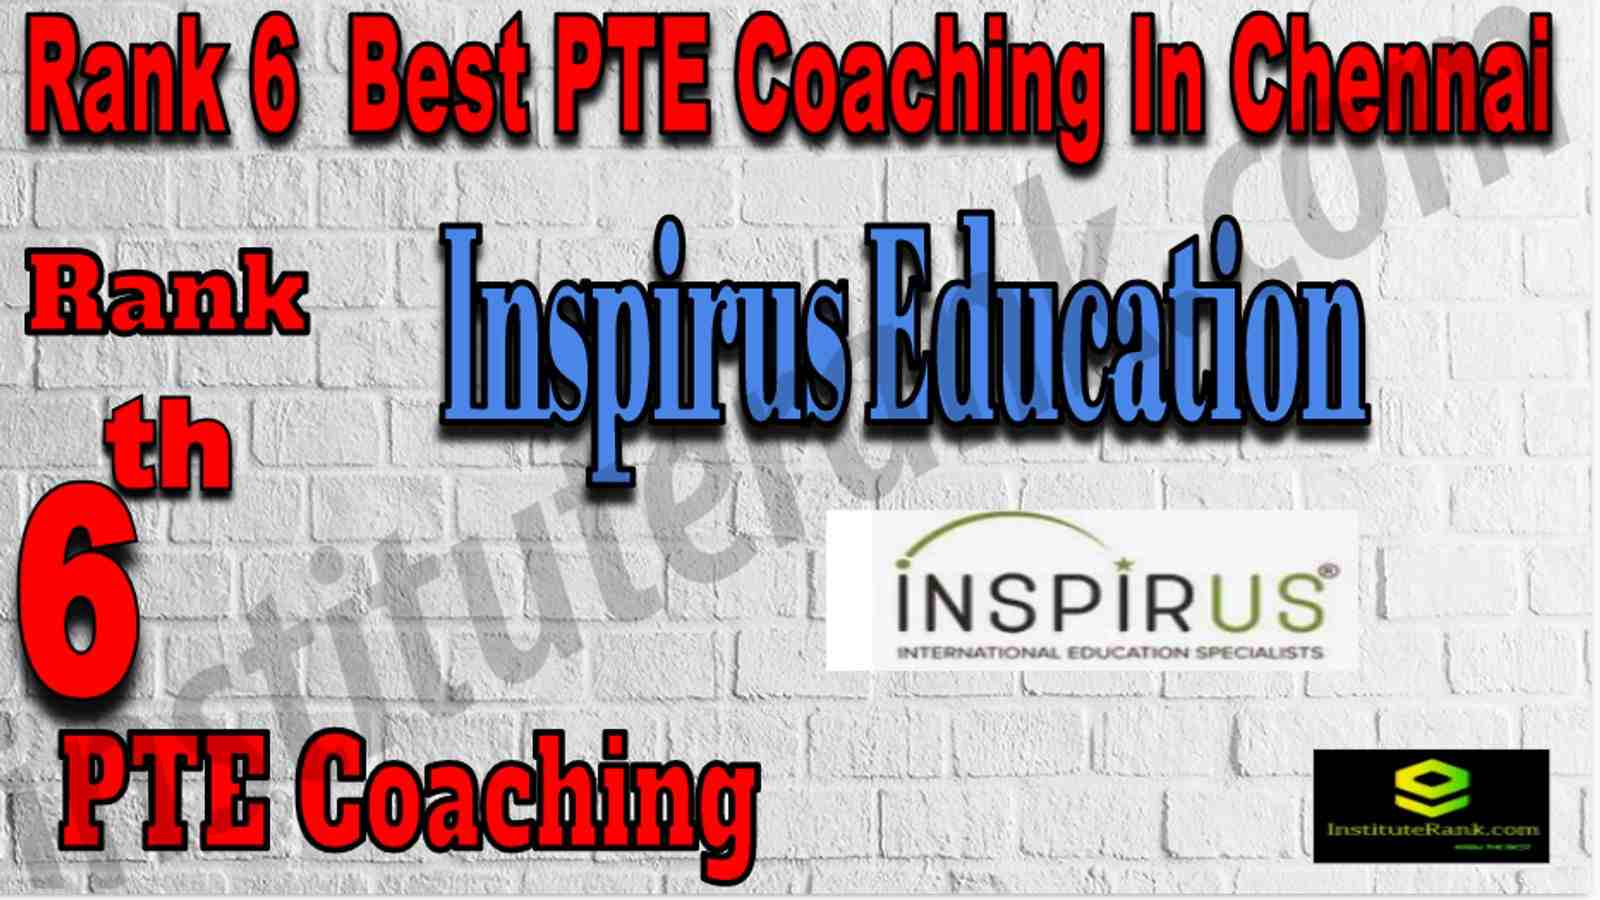 6th Best PTE Coaching In Chennai